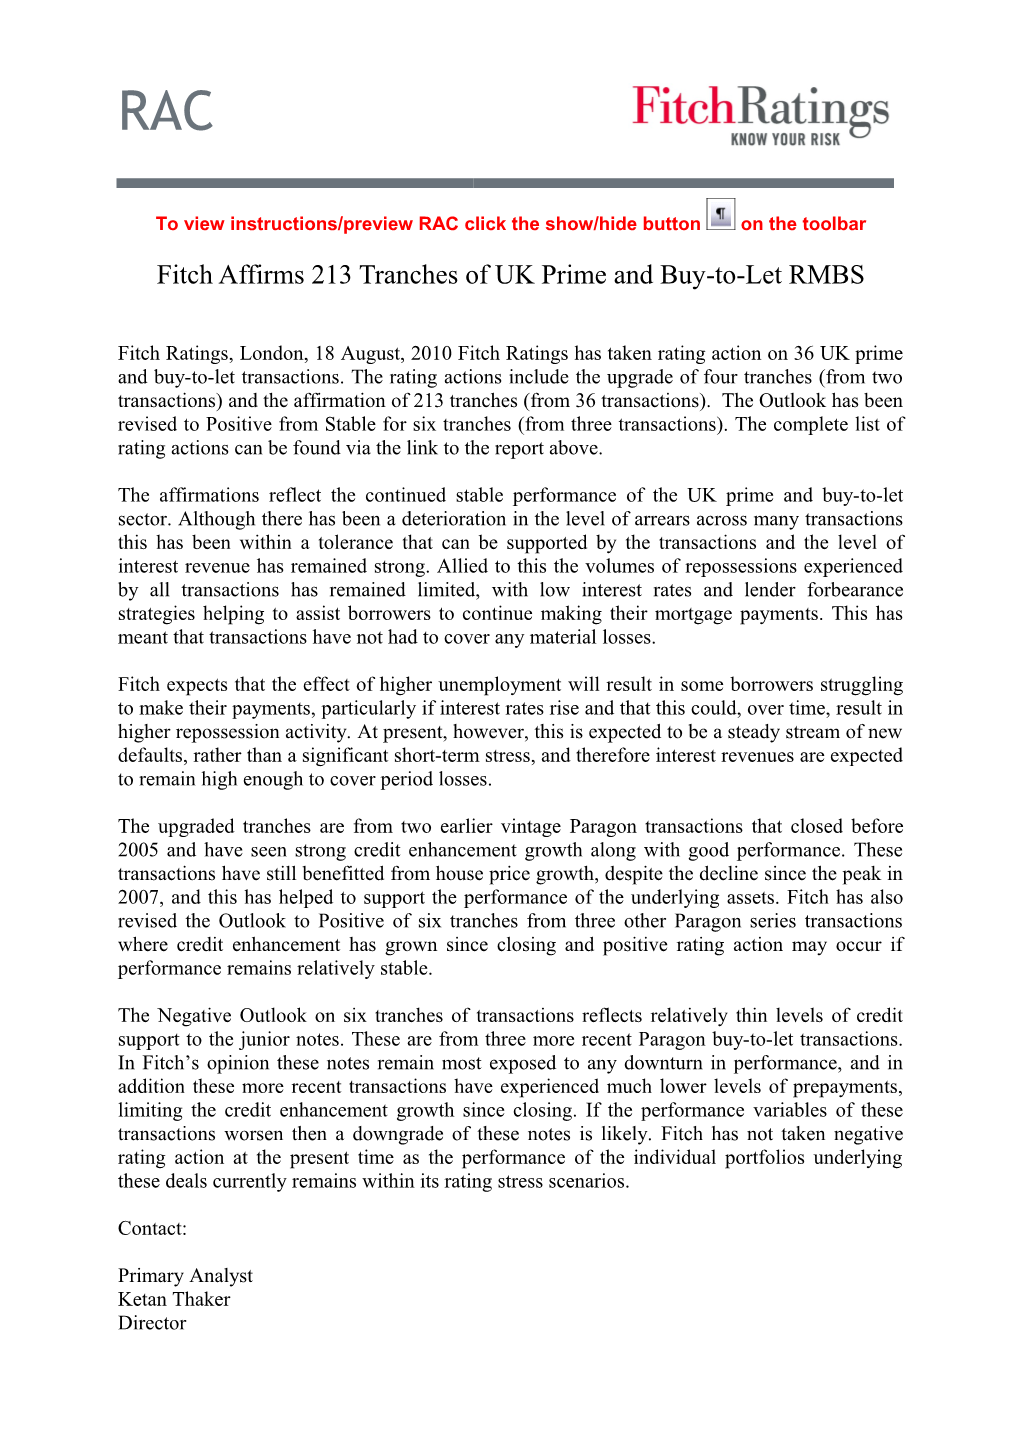 Fitch Affirms X Tranches of UK Prime RMBS